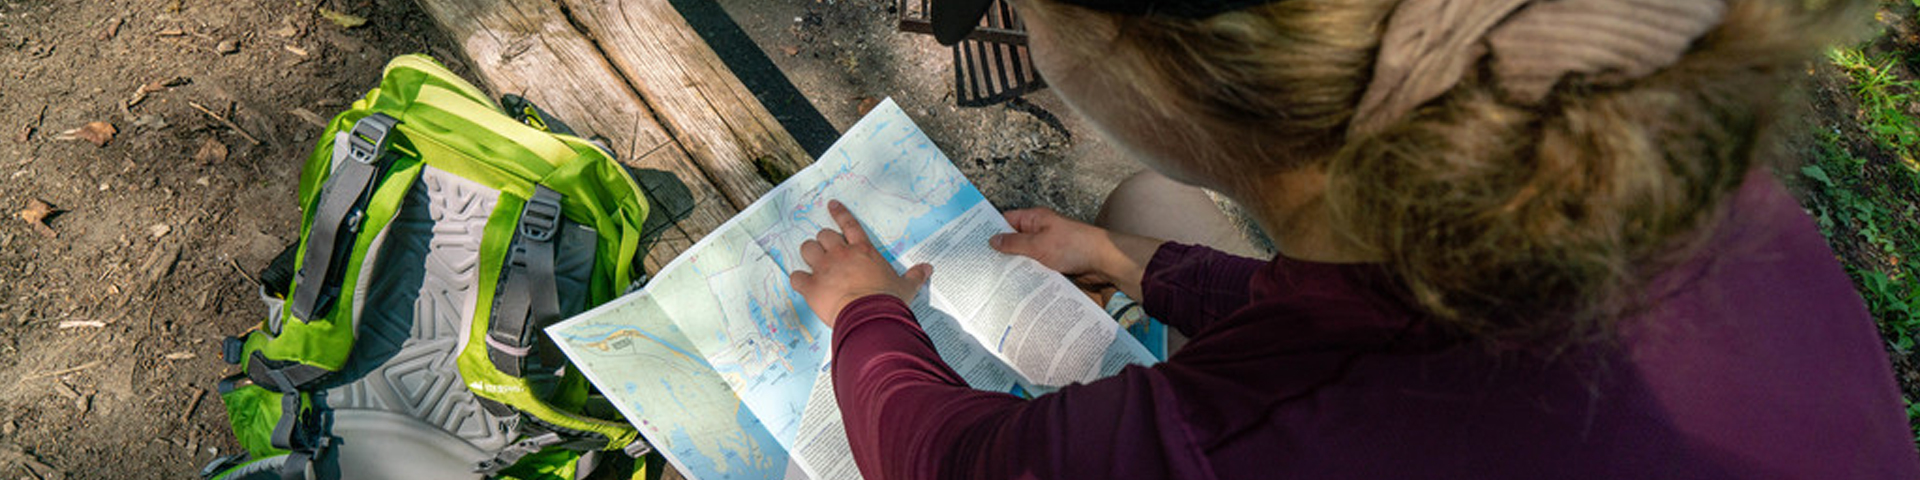 A woman looking at a map.